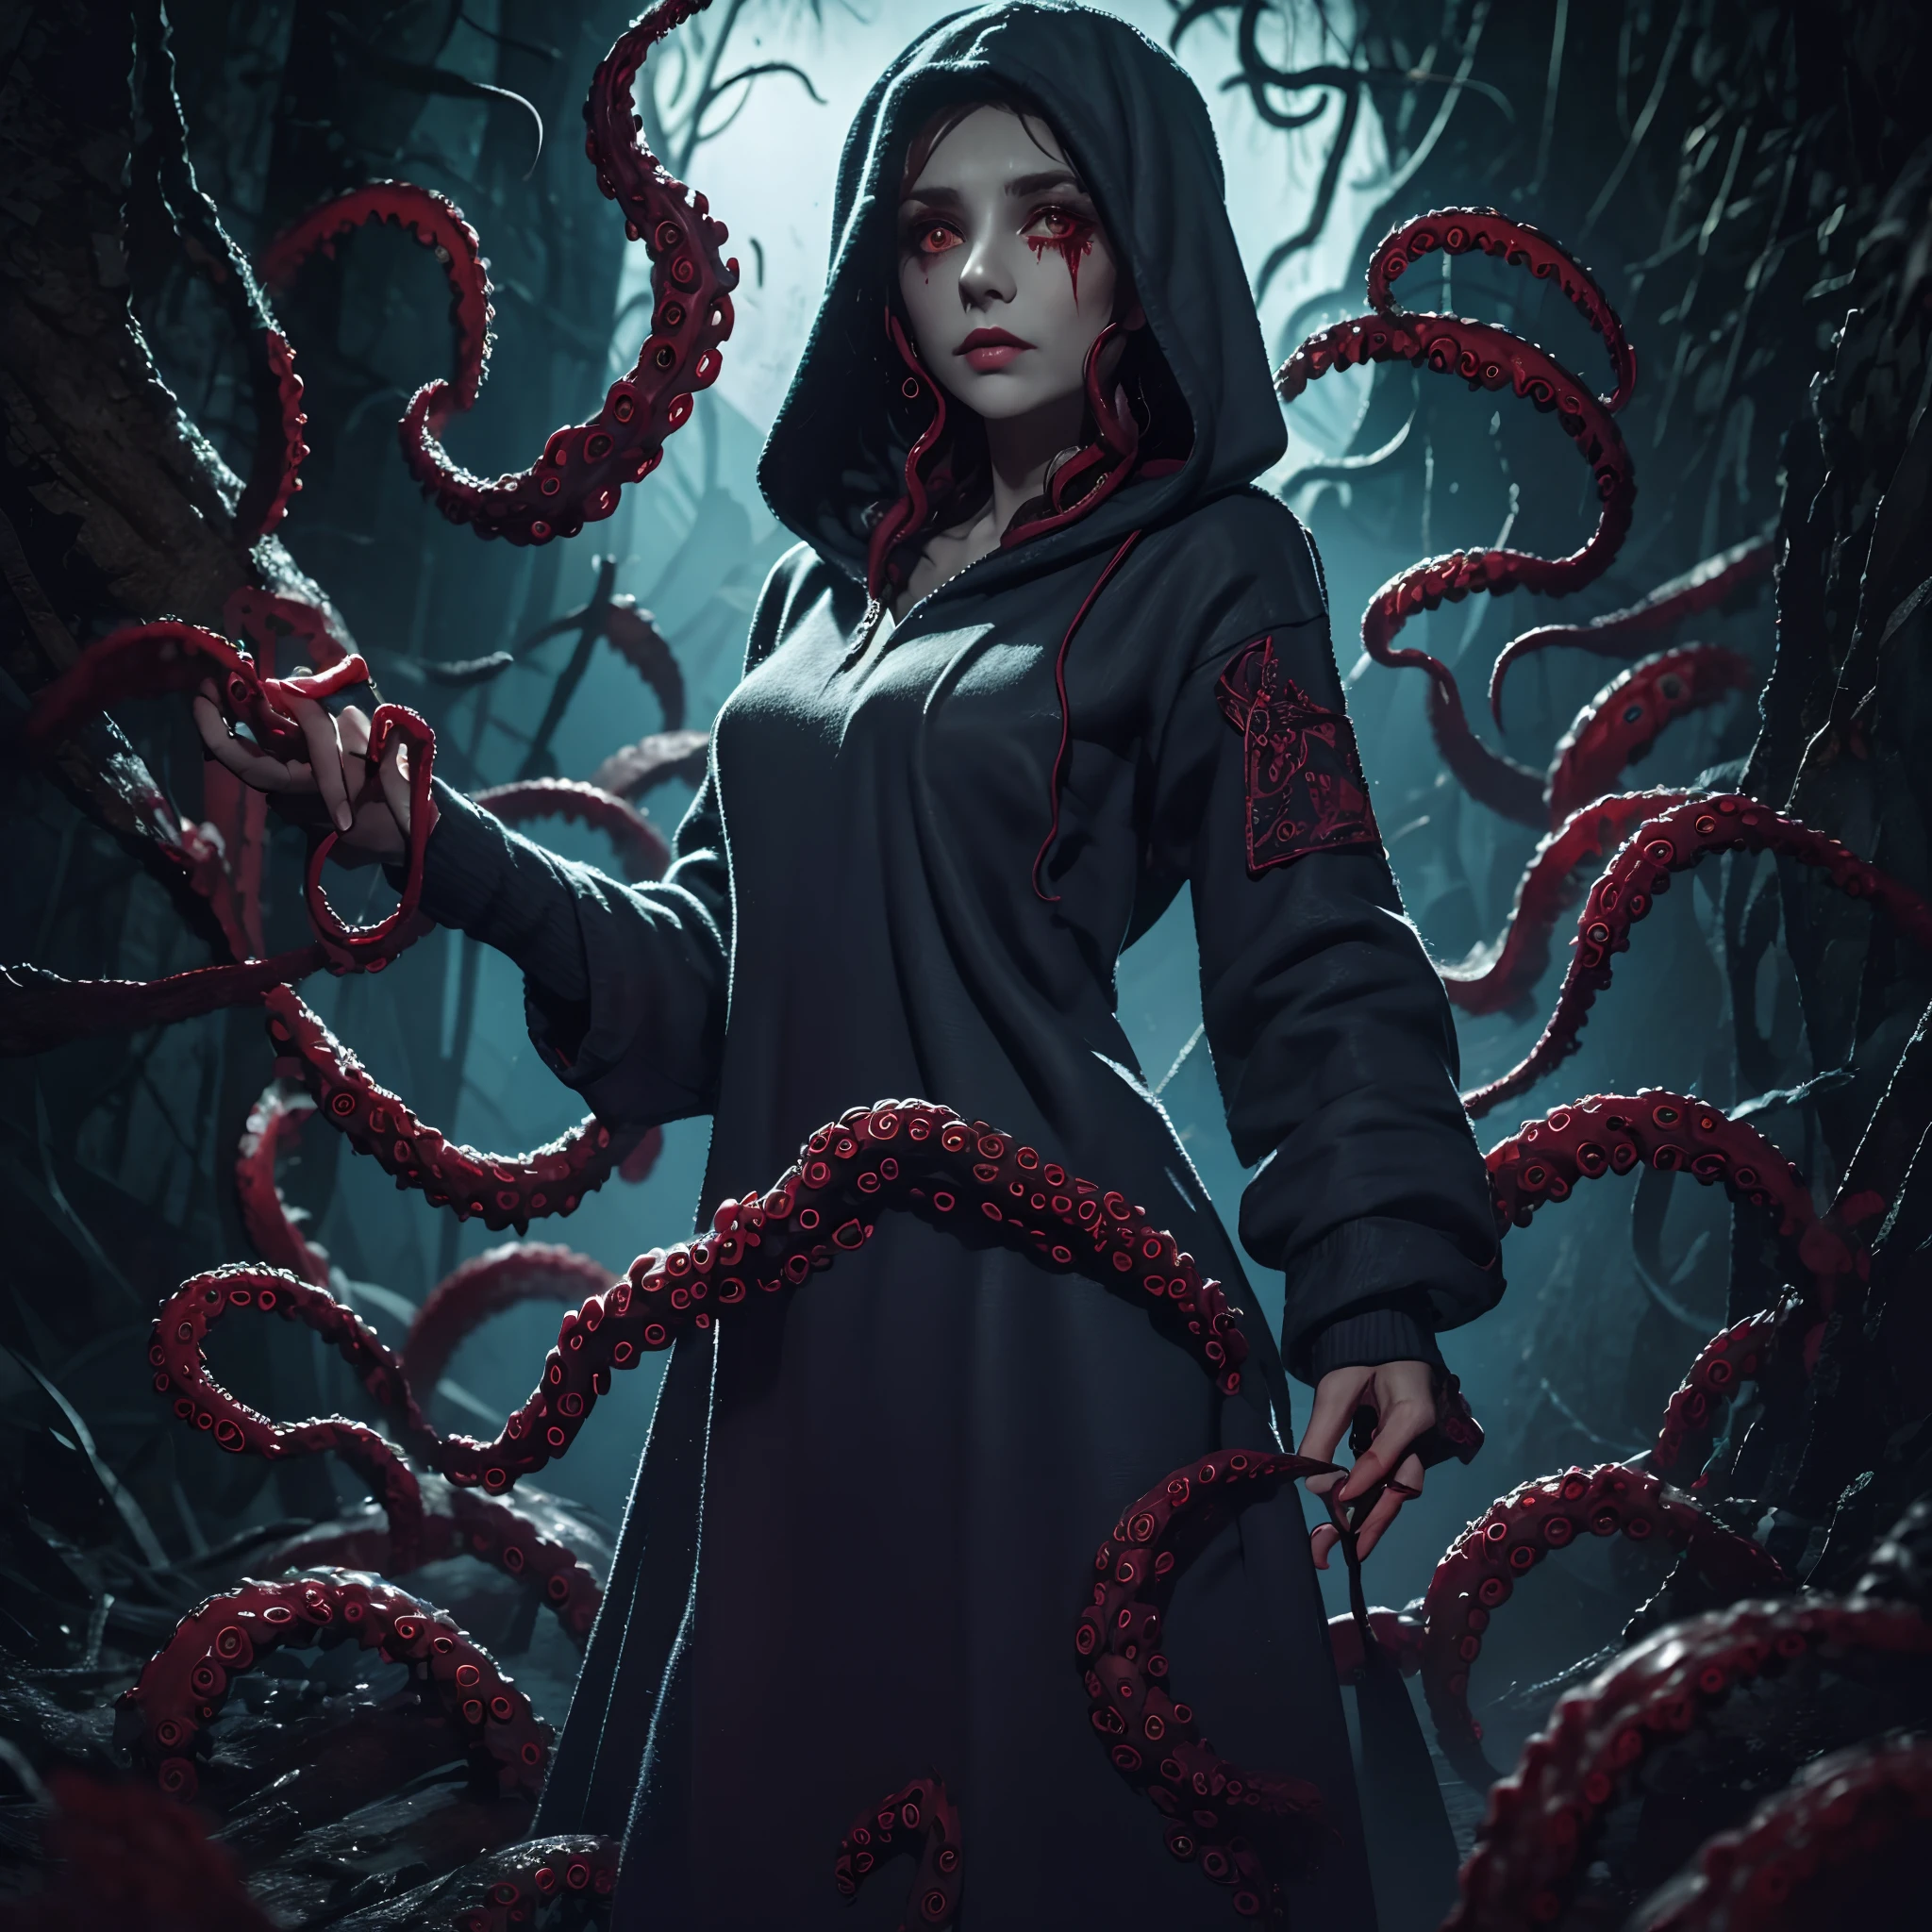 priestess, sorceress, Sorceress, Tentacles, Scary skinny girl, Slim girl with thin straight fingers in a hoodie and with tentacles, bloods, Drops of blood, Priestess of Evil, Vampire aristocracy, A Dead Look, bloodstained clothes, red-eyes, Holes for Eyes, blood from the eyes, Runes, Ancient runes, Runes on clothes